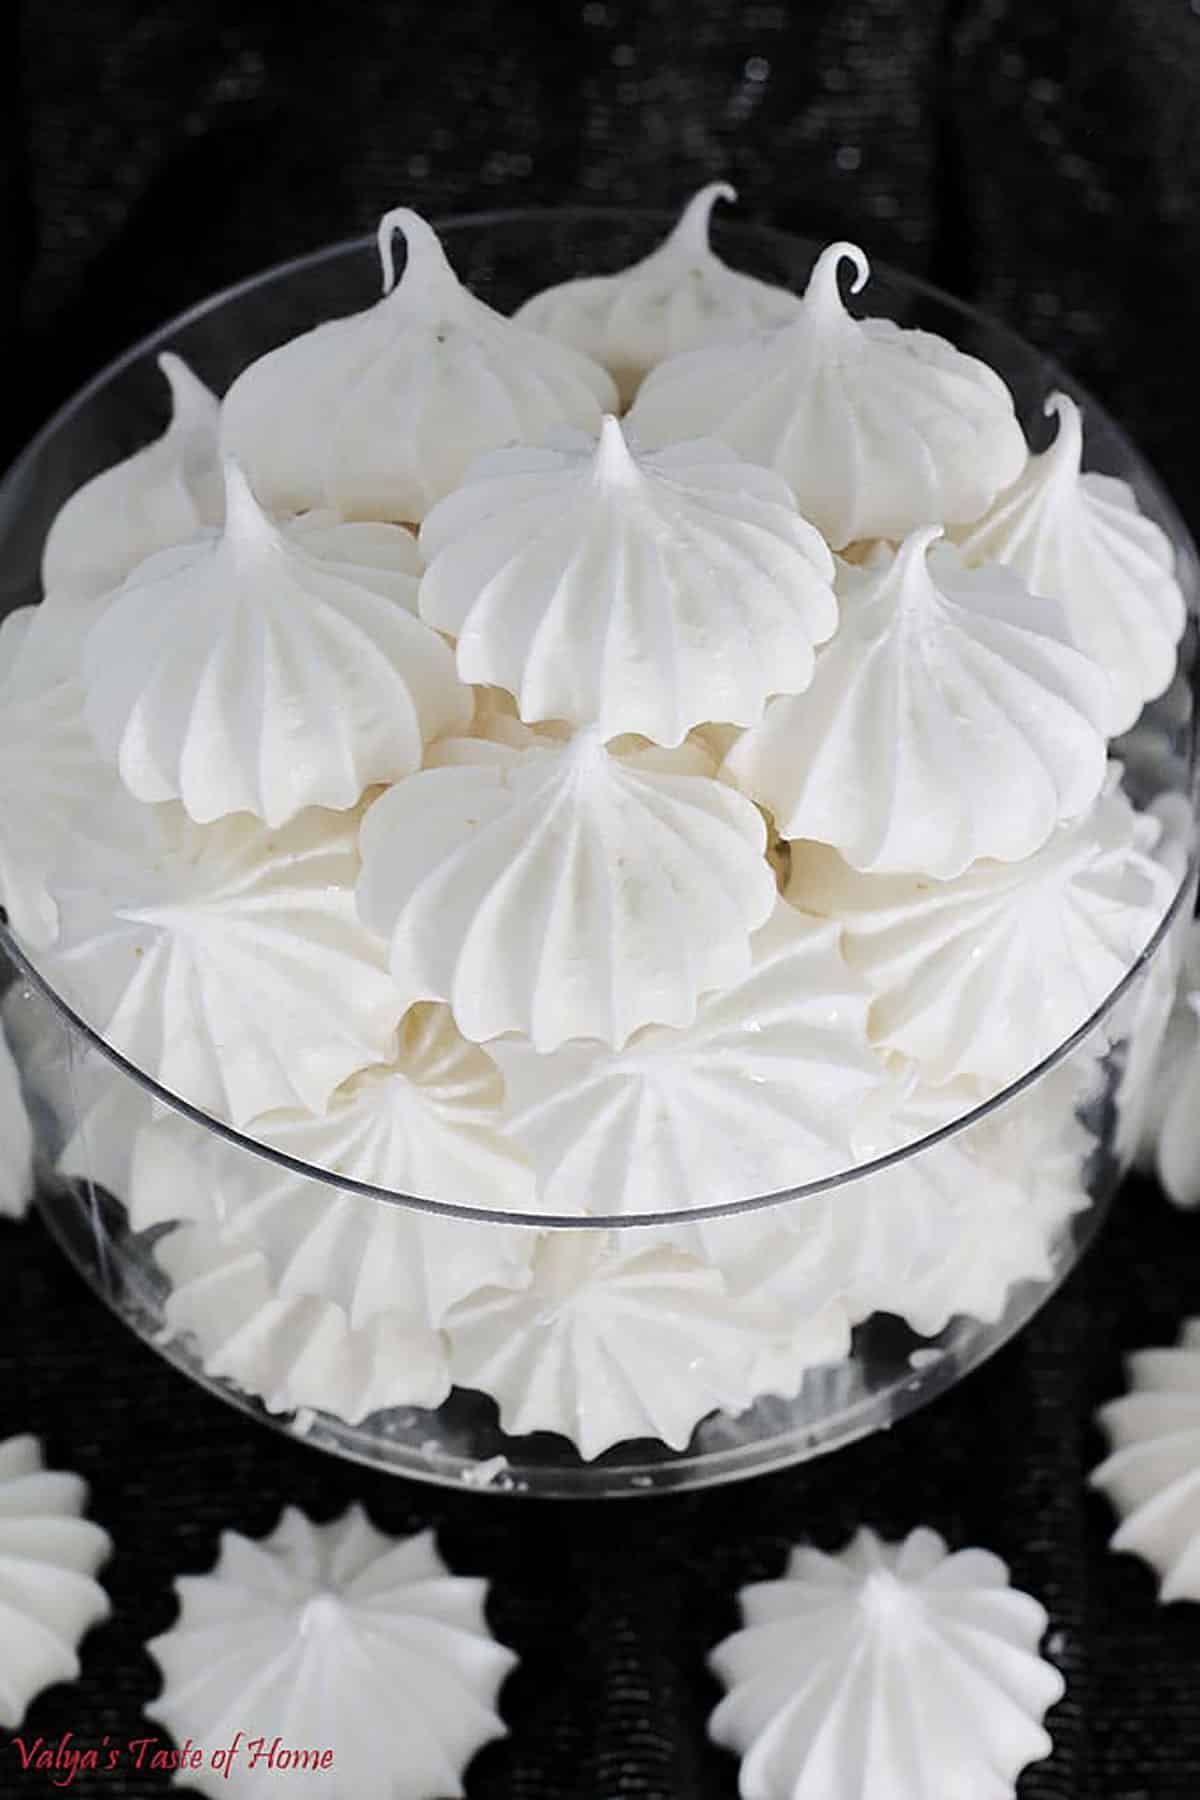 If you're looking to make classic and perfect meringue cookies, this recipe is perfect and will give you crisp, airy, perfectly sweet cookies every single time!